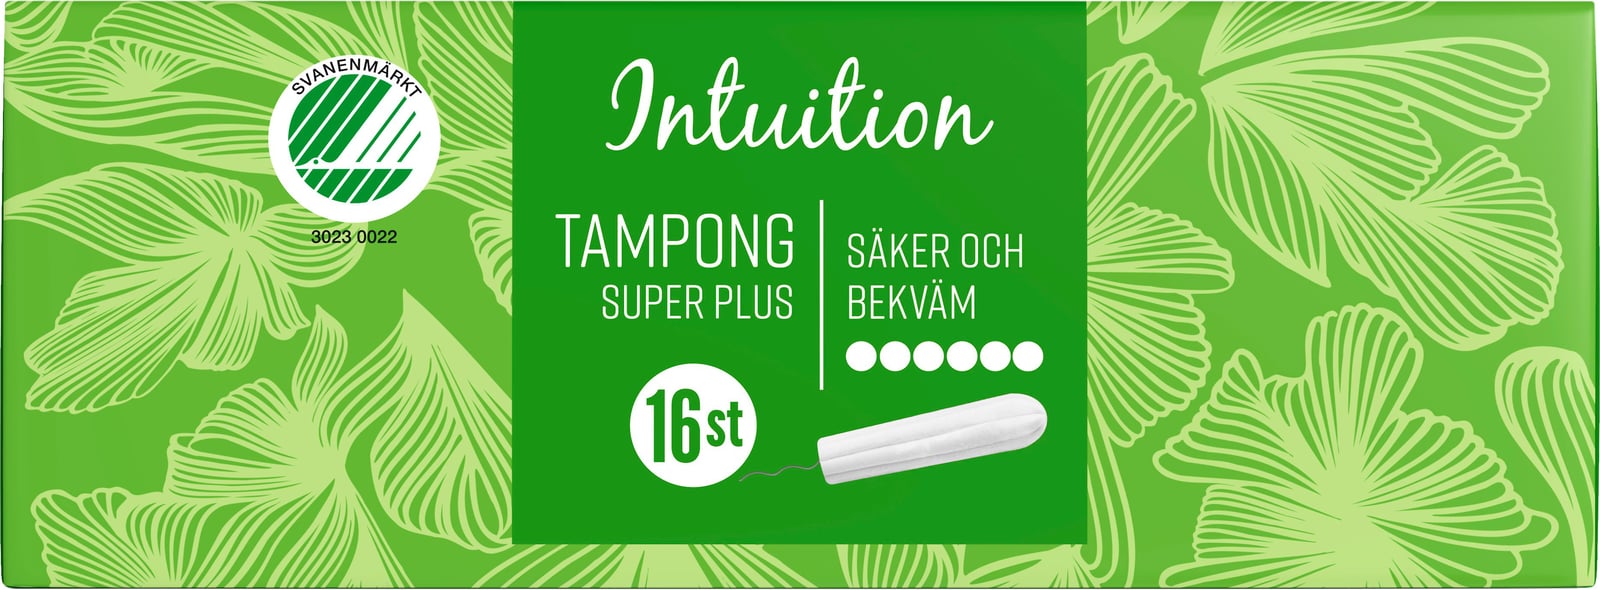 Intuition Tampong Super Plus 16 st